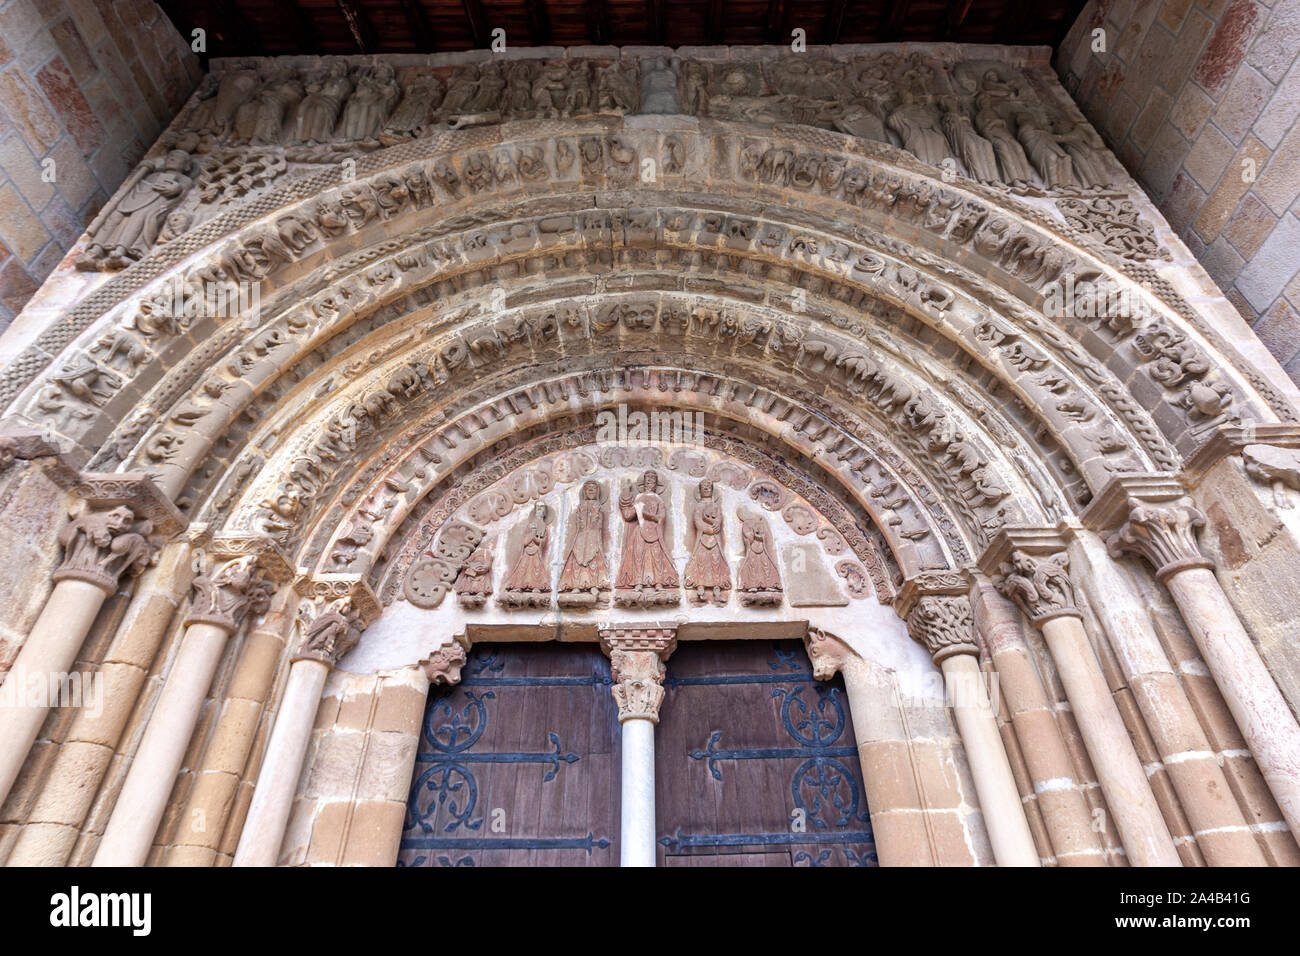 Archivolt and Tympanum of Porta Speciosa with a depiction of Nunio and Alodio, Monastery of Leyre,  Romanesque architecture in Navarre, Spain Stock Photo